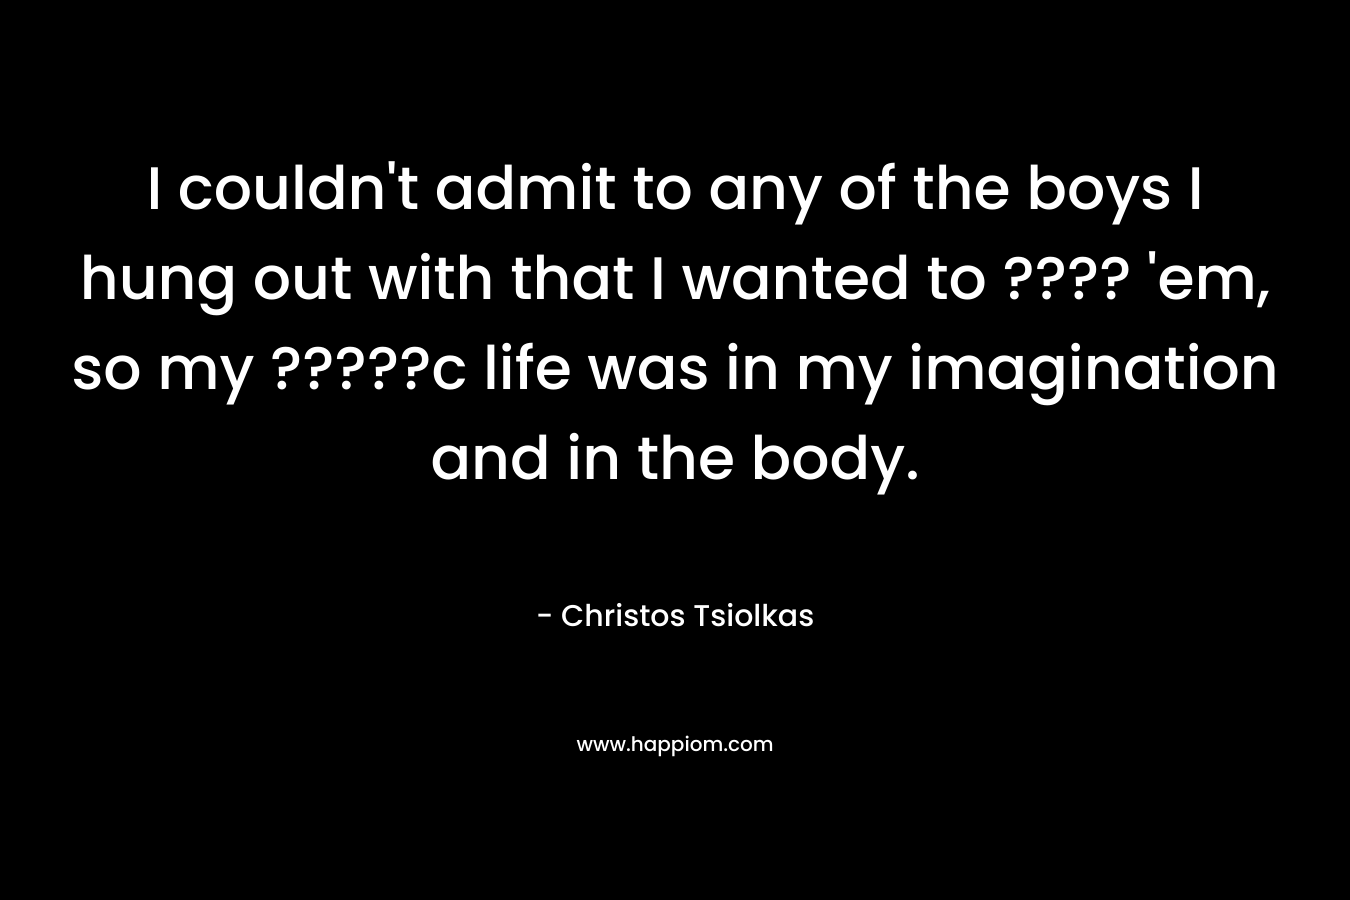 I couldn’t admit to any of the boys I hung out with that I wanted to ???? ’em, so my ?????c life was in my imagination and in the body. – Christos Tsiolkas